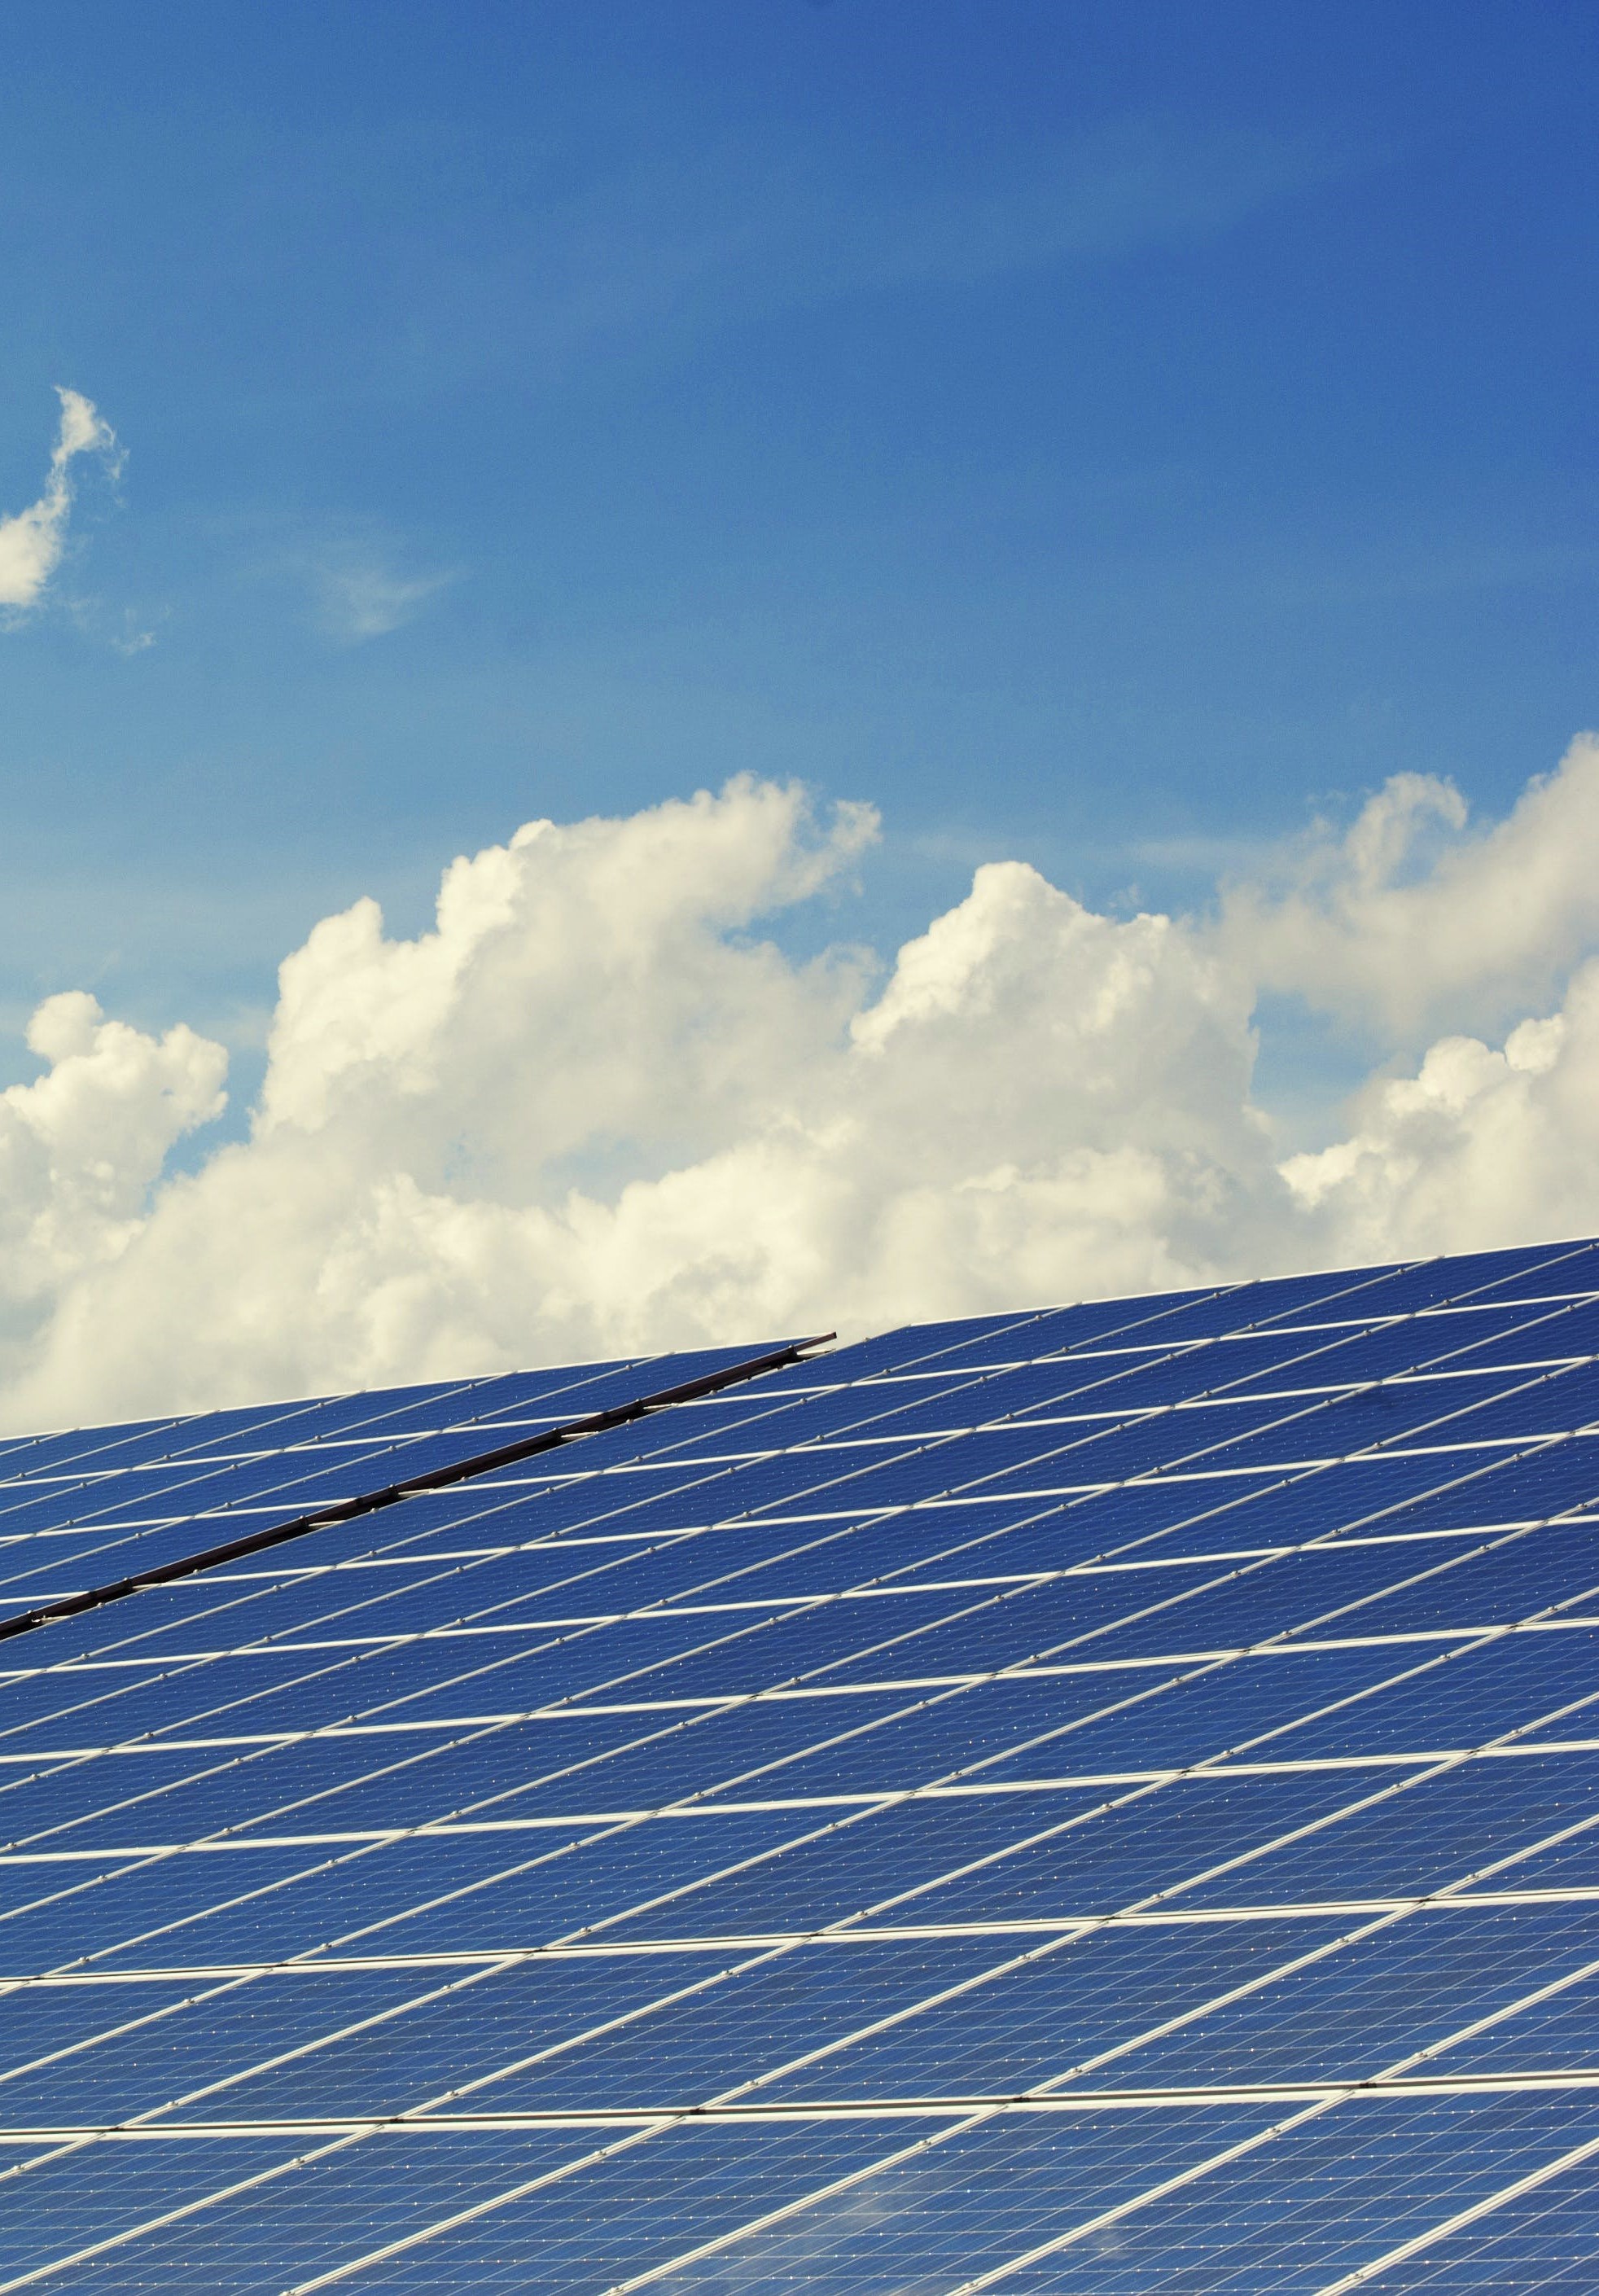 The advantages of Behind-the-Meter Energy Storage with rooftop photovoltaics